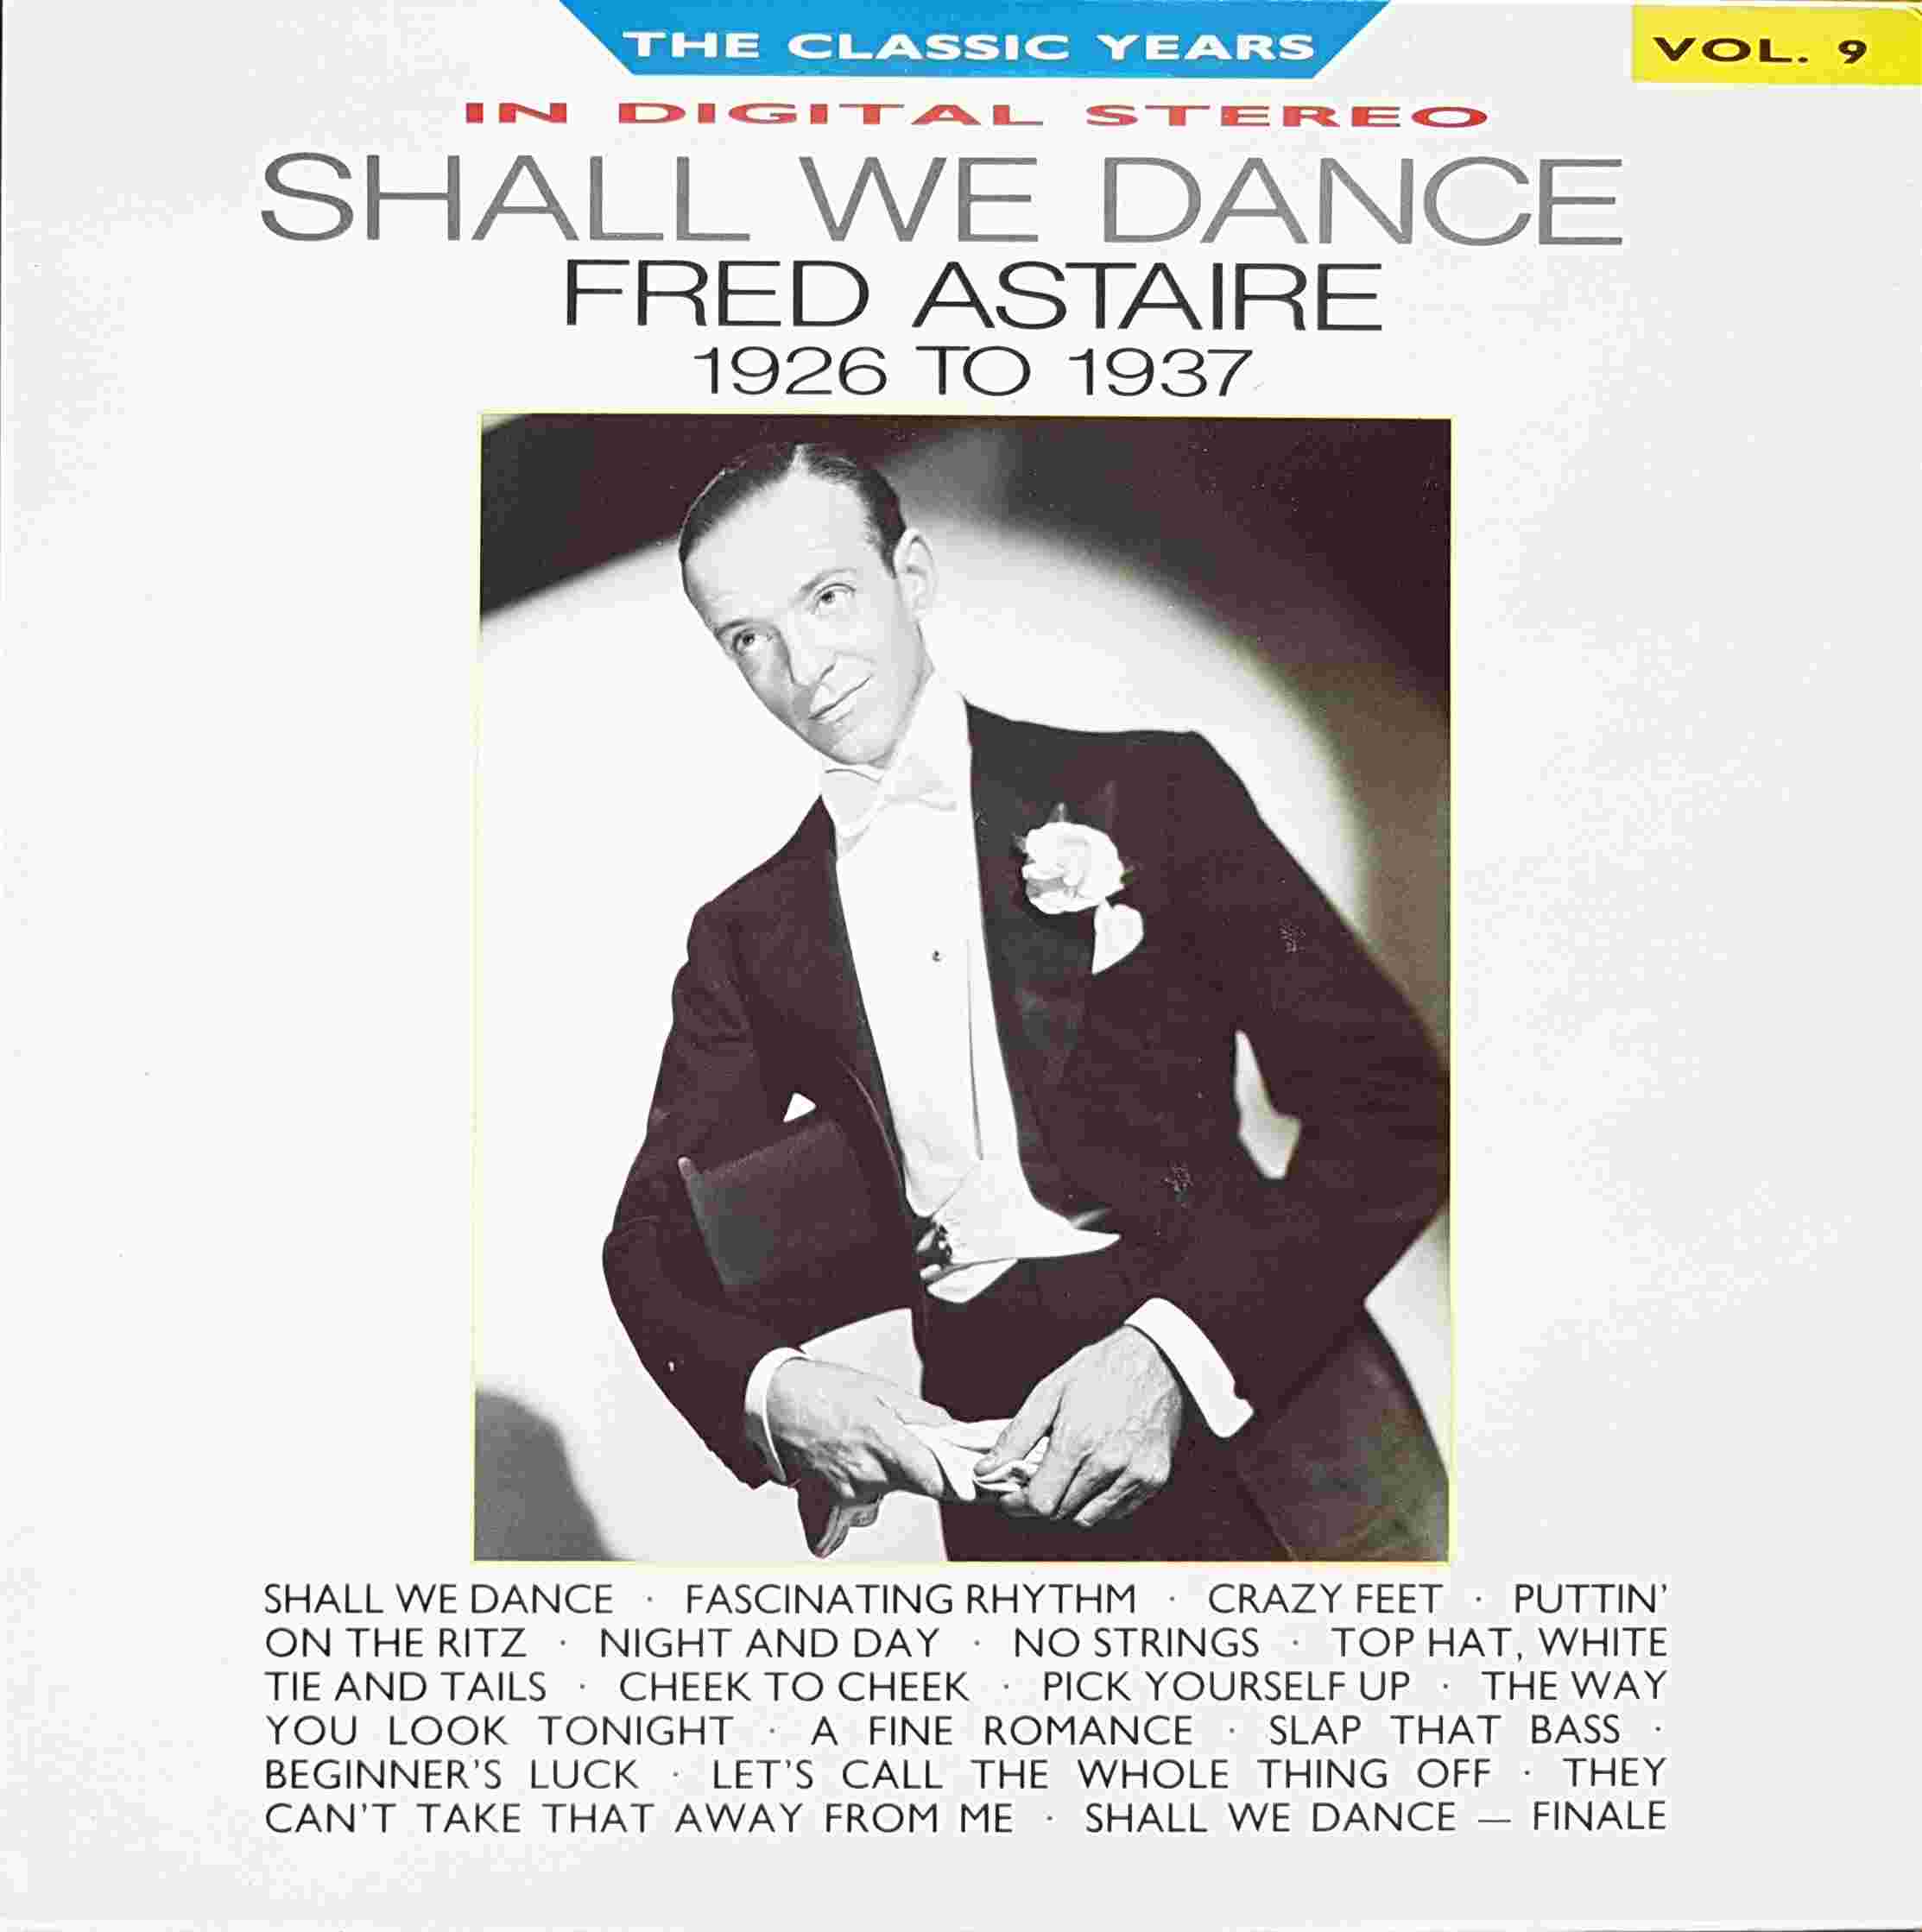 Picture of REB 665 Classic years - Volume 9, Fred Astaire by artist Fred Astaire from the BBC albums - Records and Tapes library